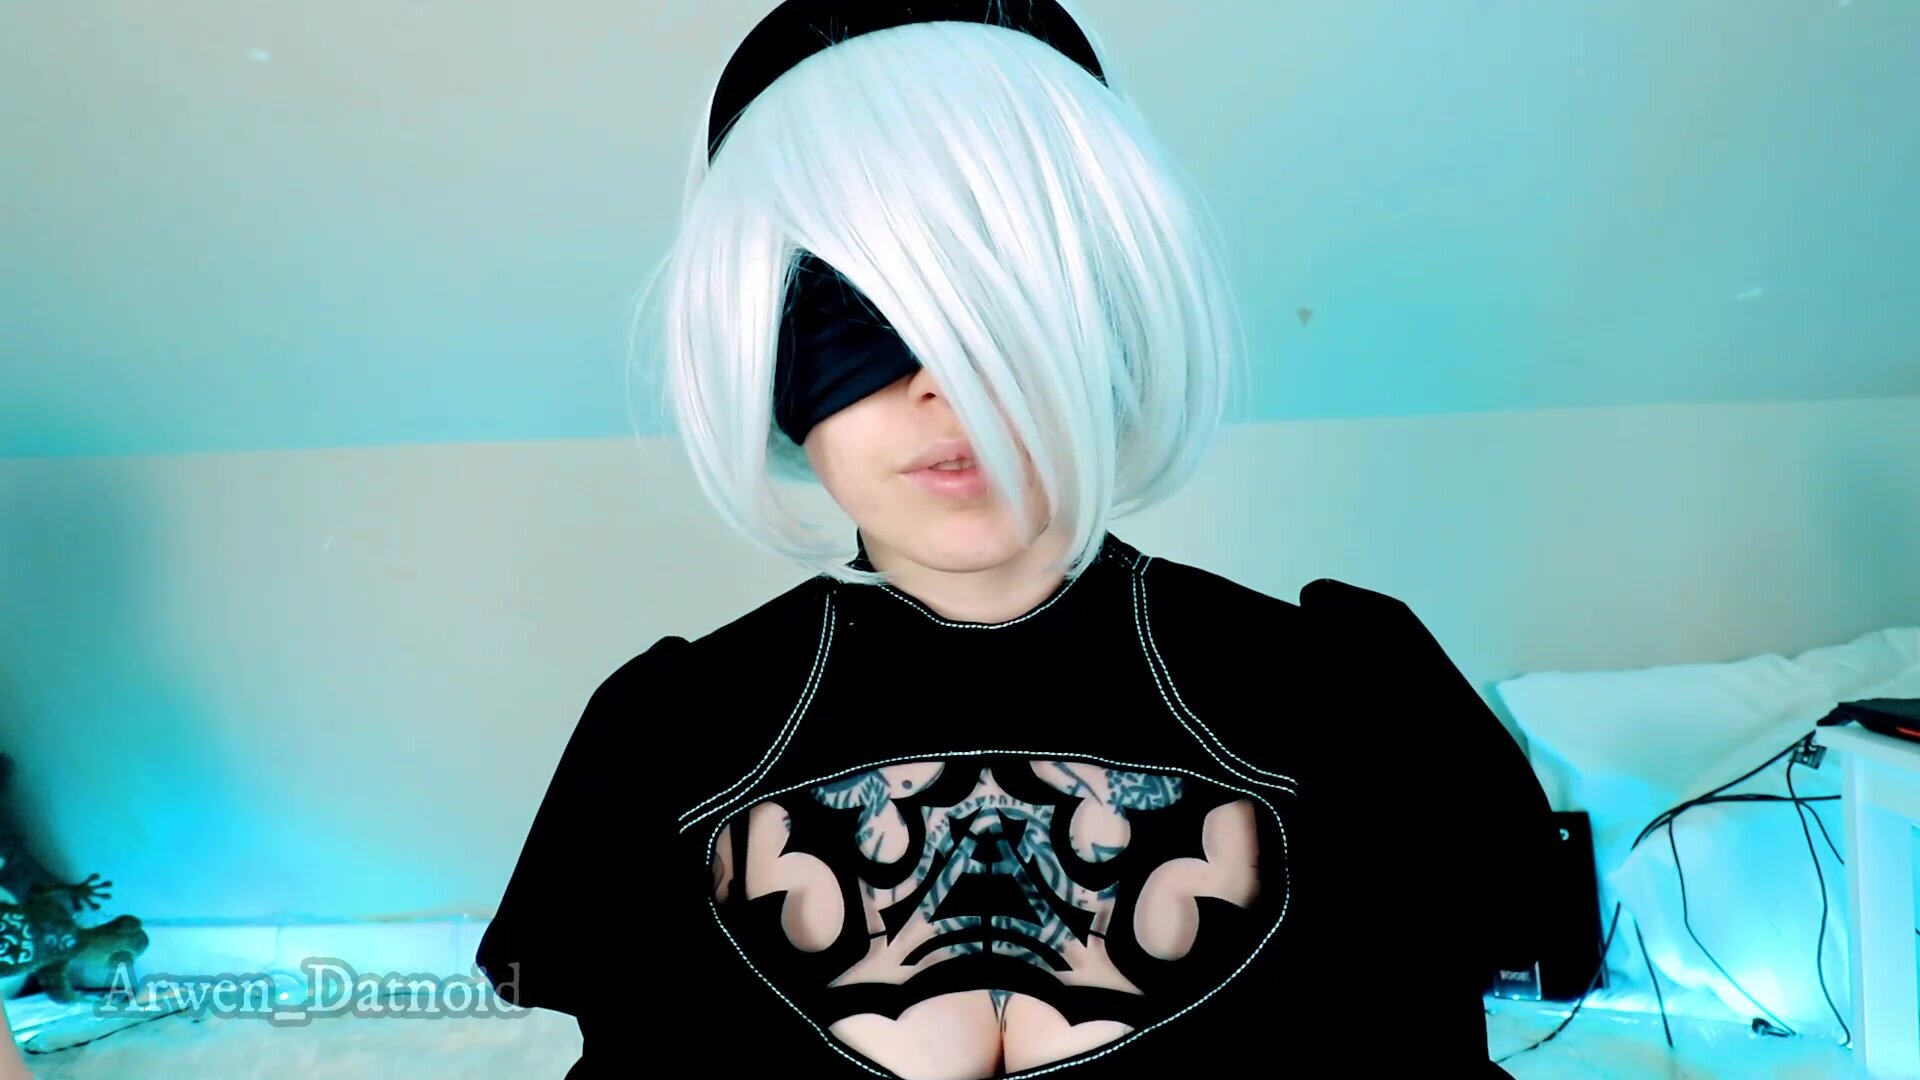 2B Is Late To The Party